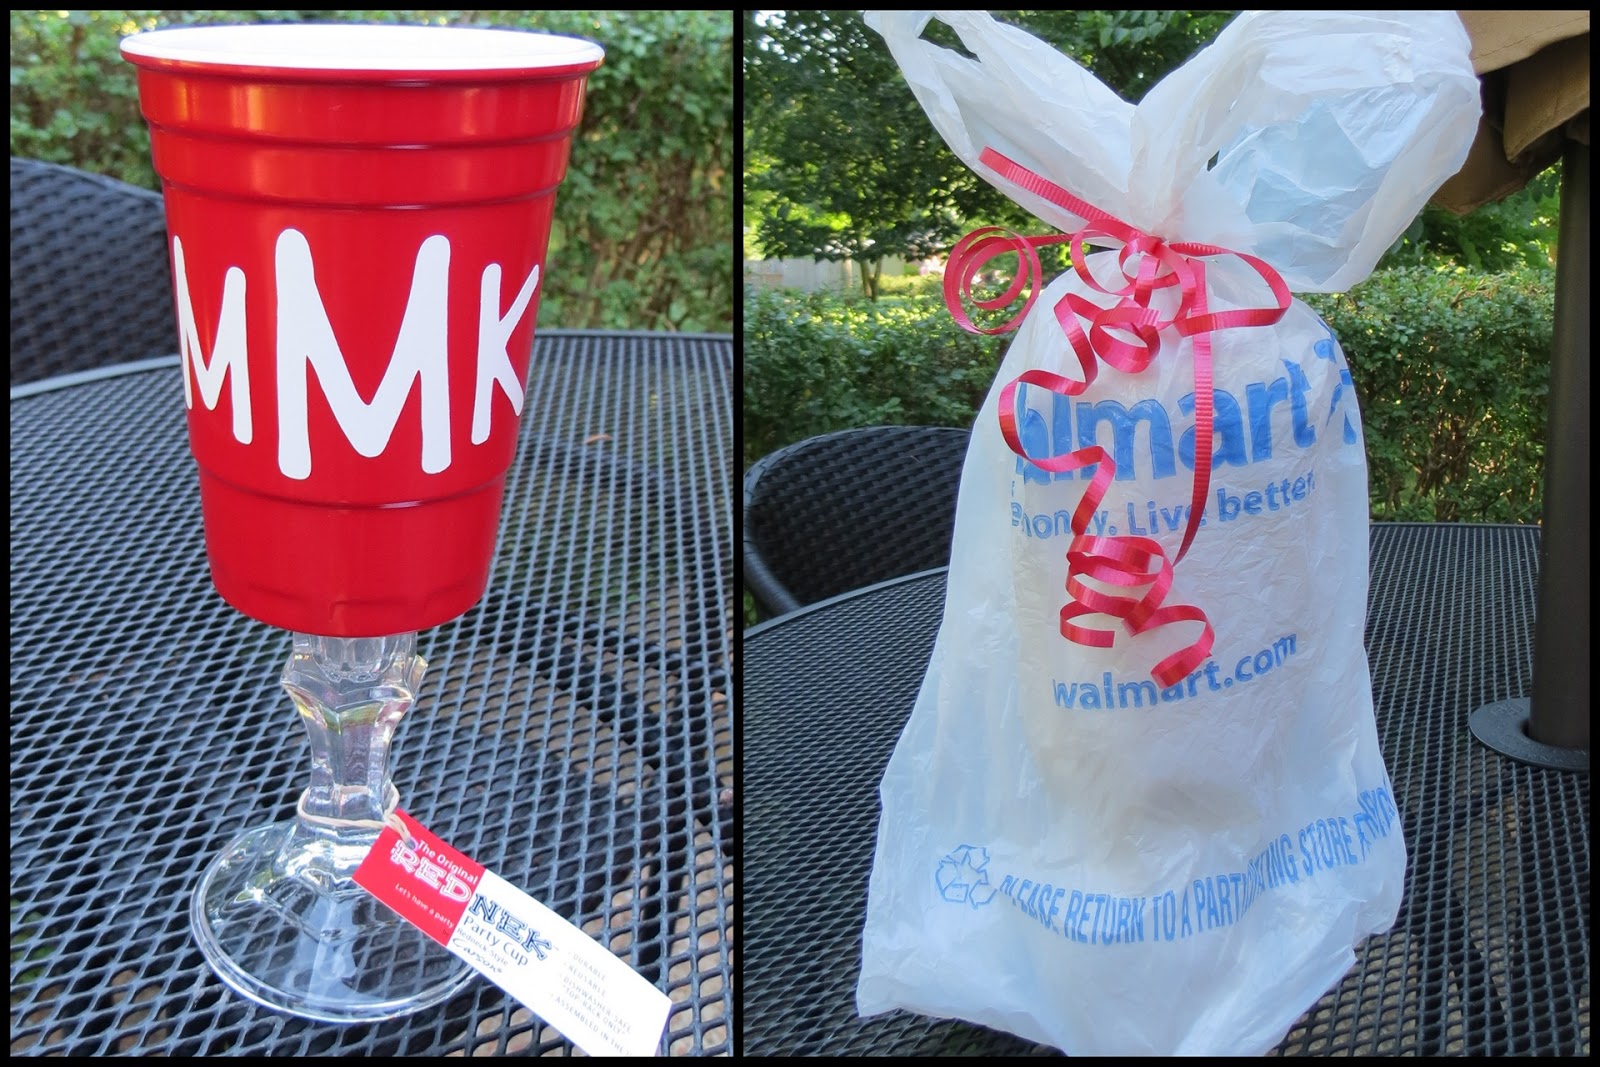 [Monogramed-Red-Solo-Cup-Wineglass-gift-walmart-bag-wrapping%255B5%255D.jpg]